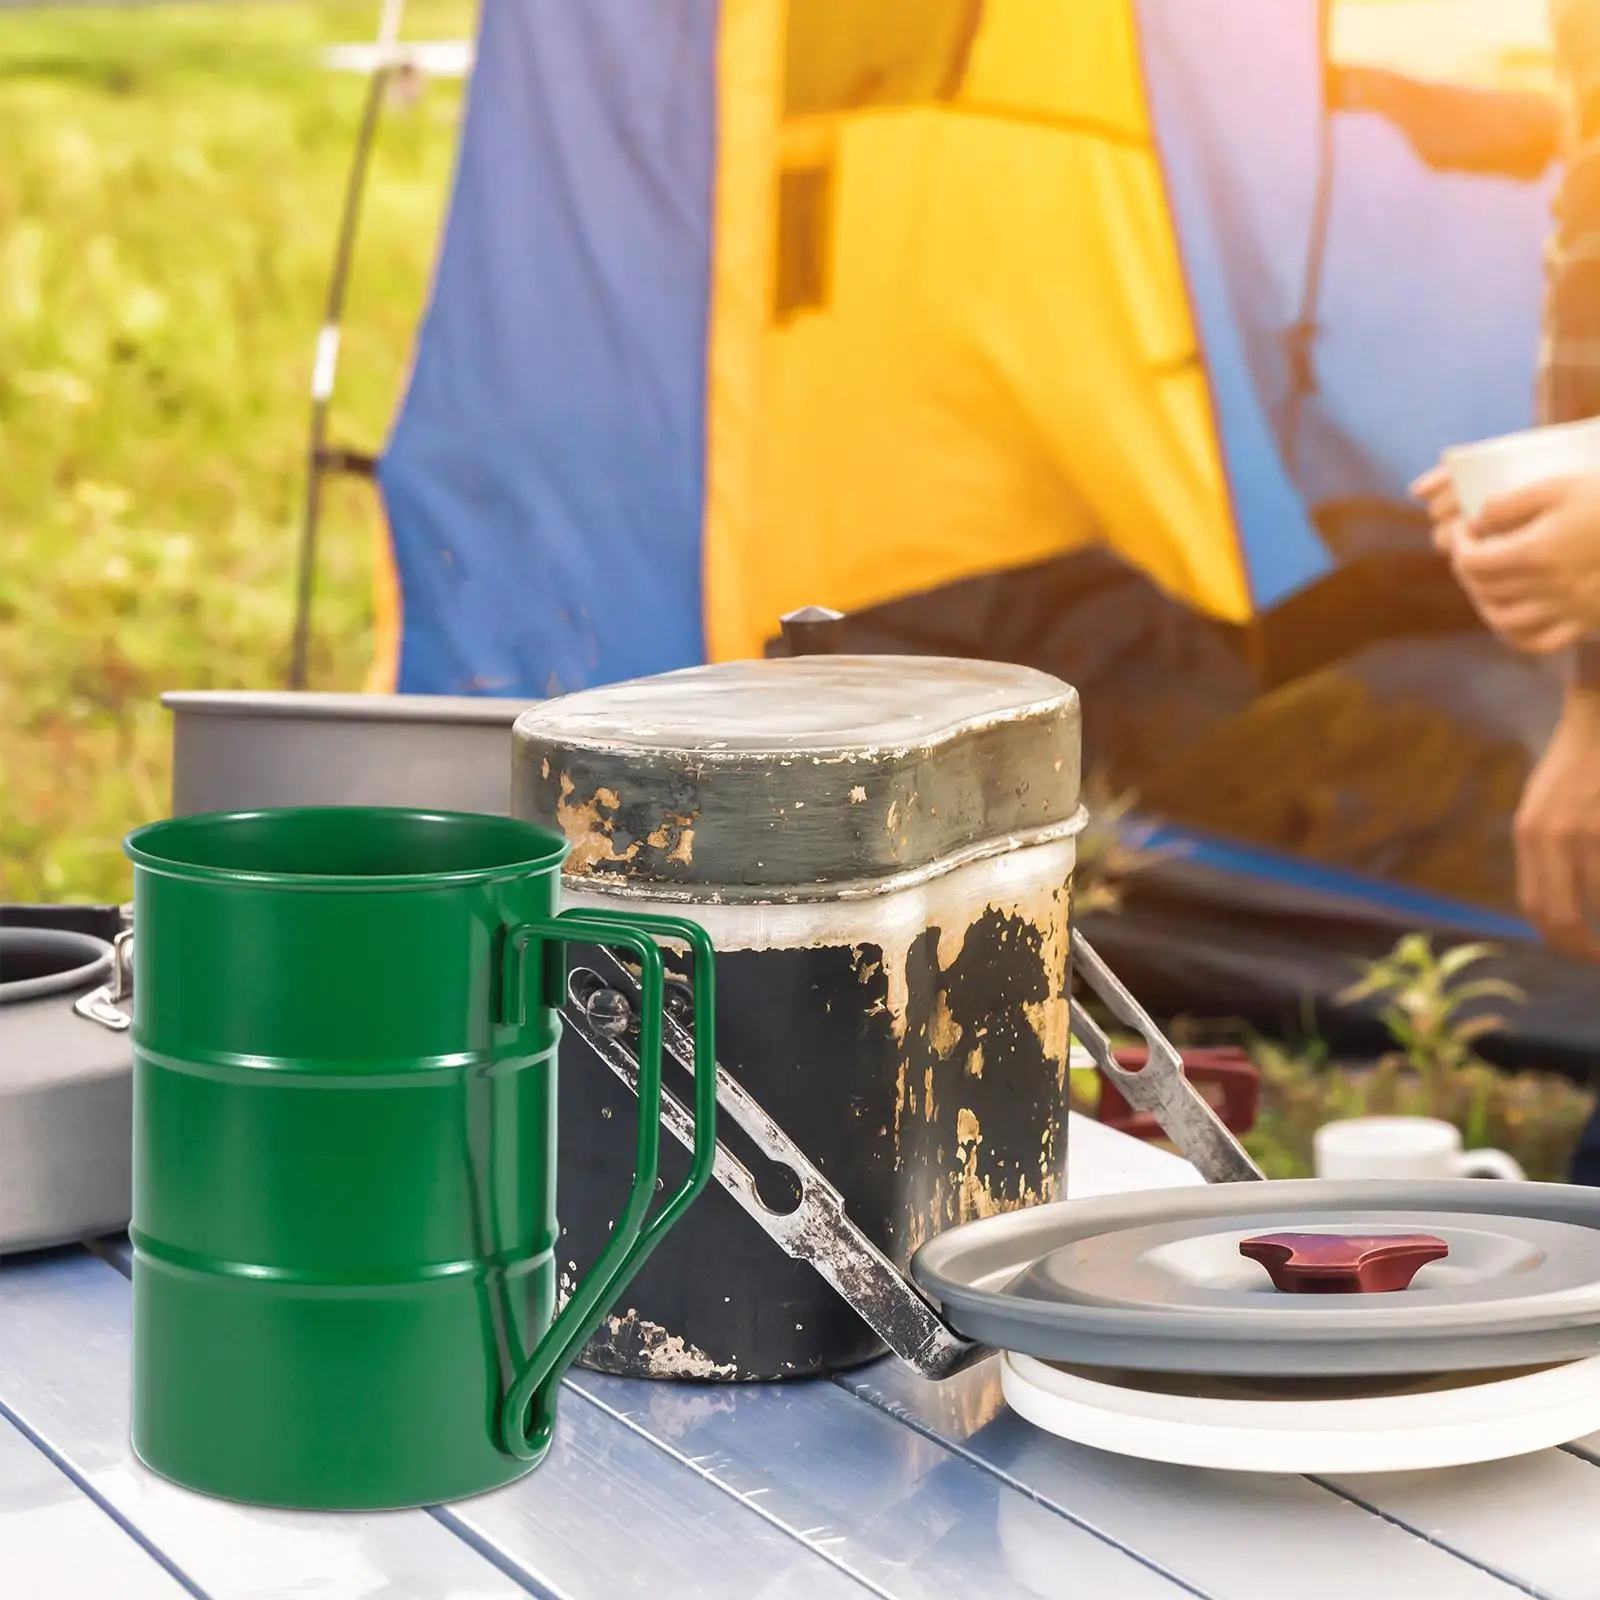 Stainless Steel Camping Mug Drinkware Coffee Cup Reusable Retro Outdoor Camping Cup Coffee Mug for Picnic Hiking Outdoor Travel